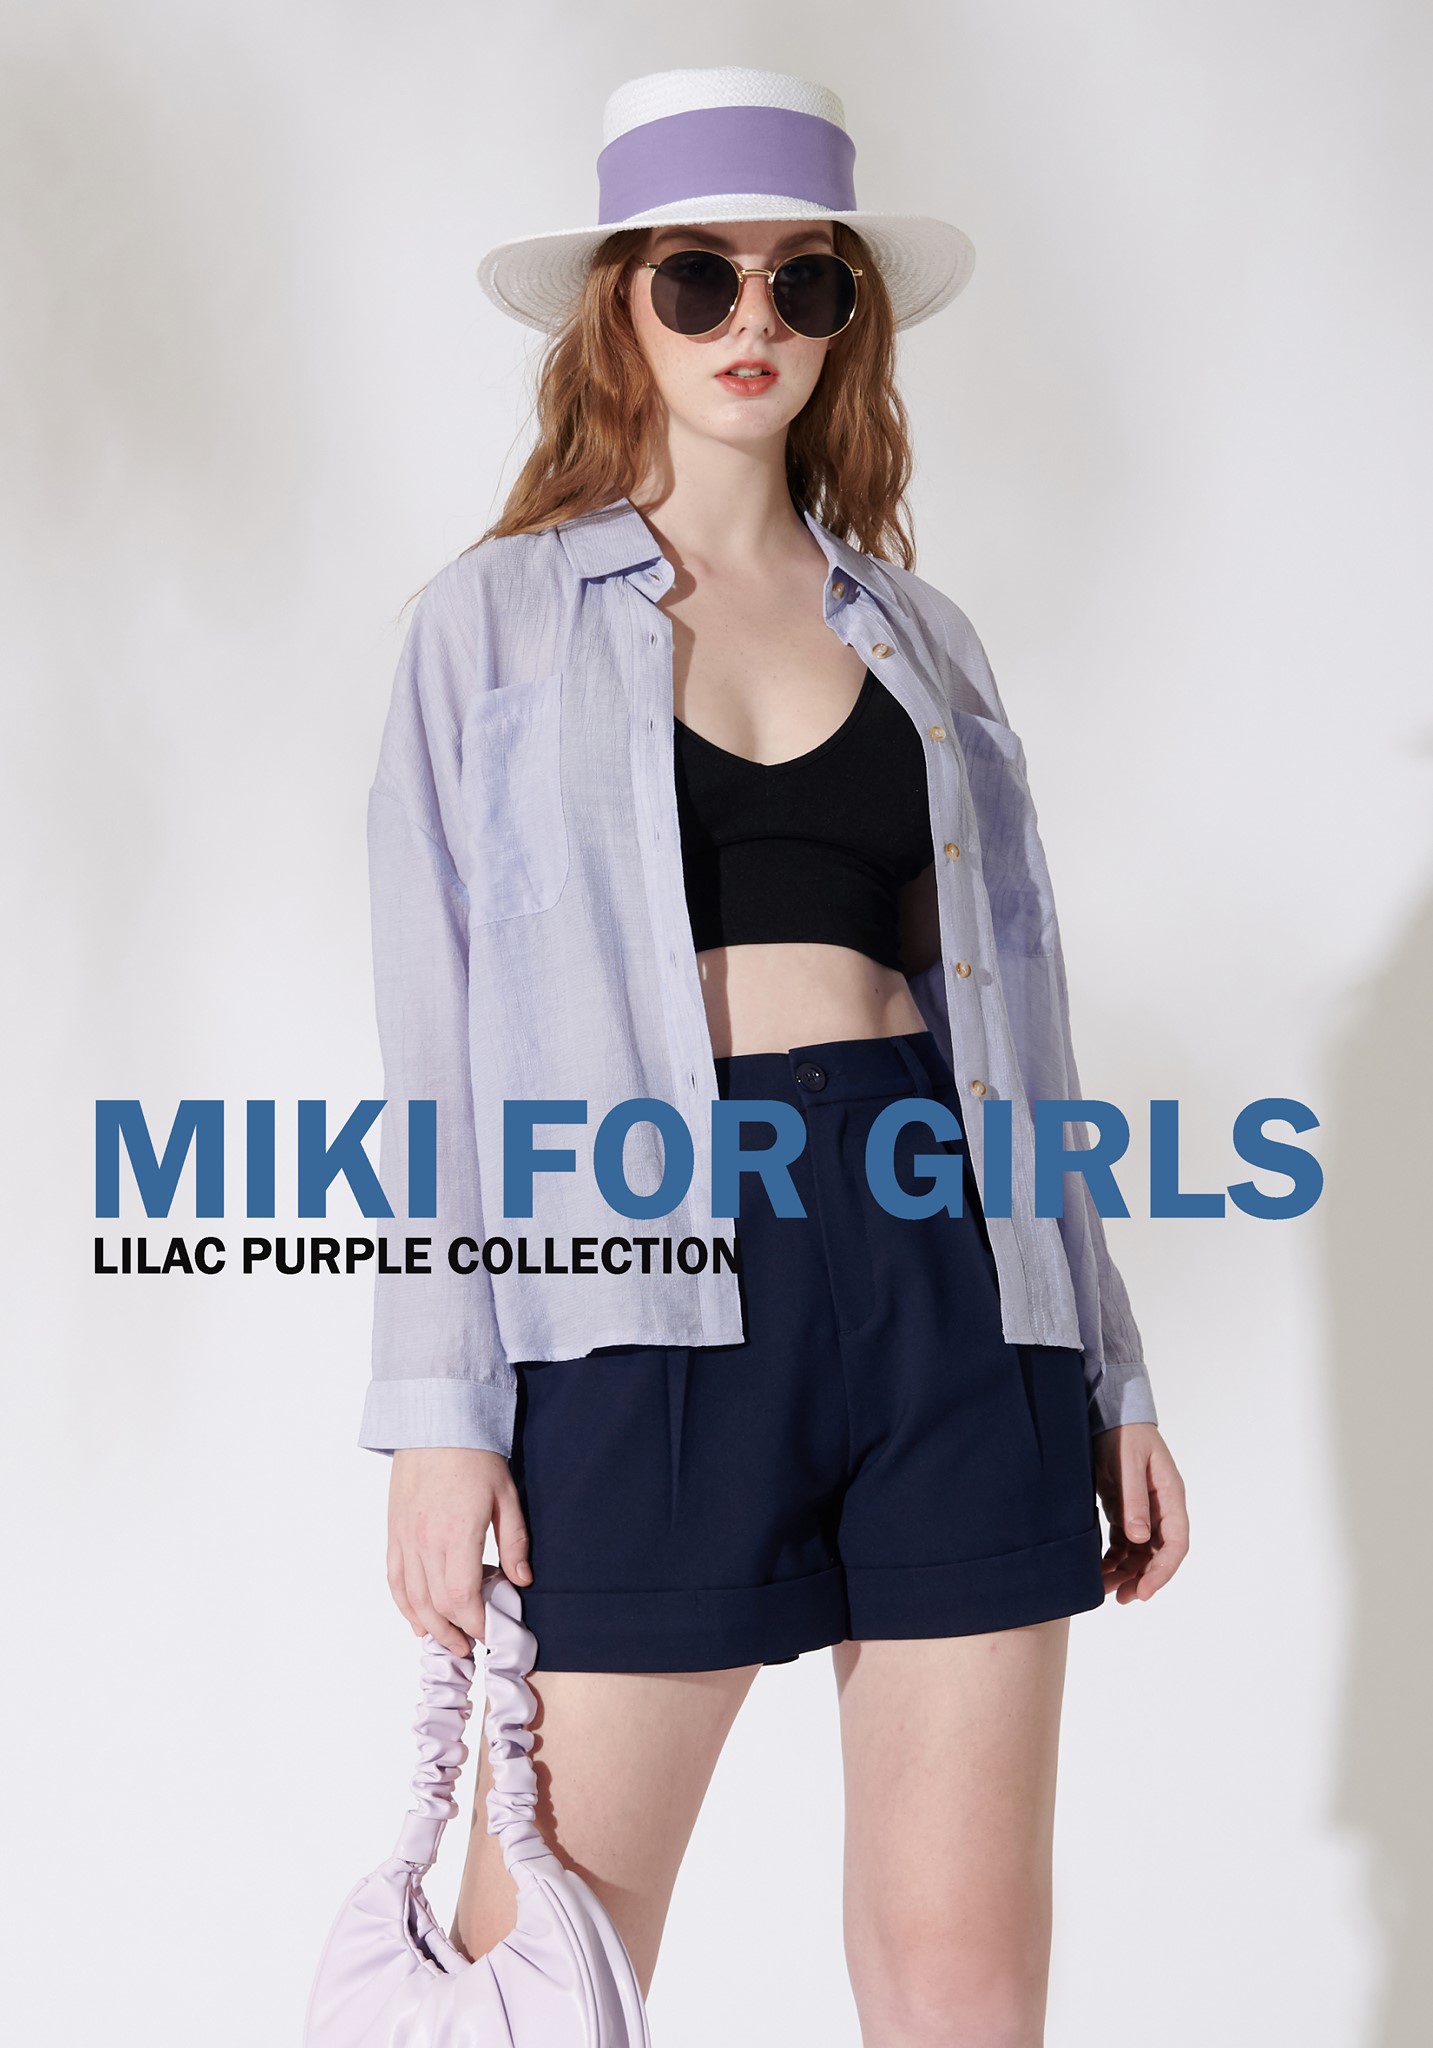 MIKI FOR GIRLS – LILAC PURPLE COLLECTION